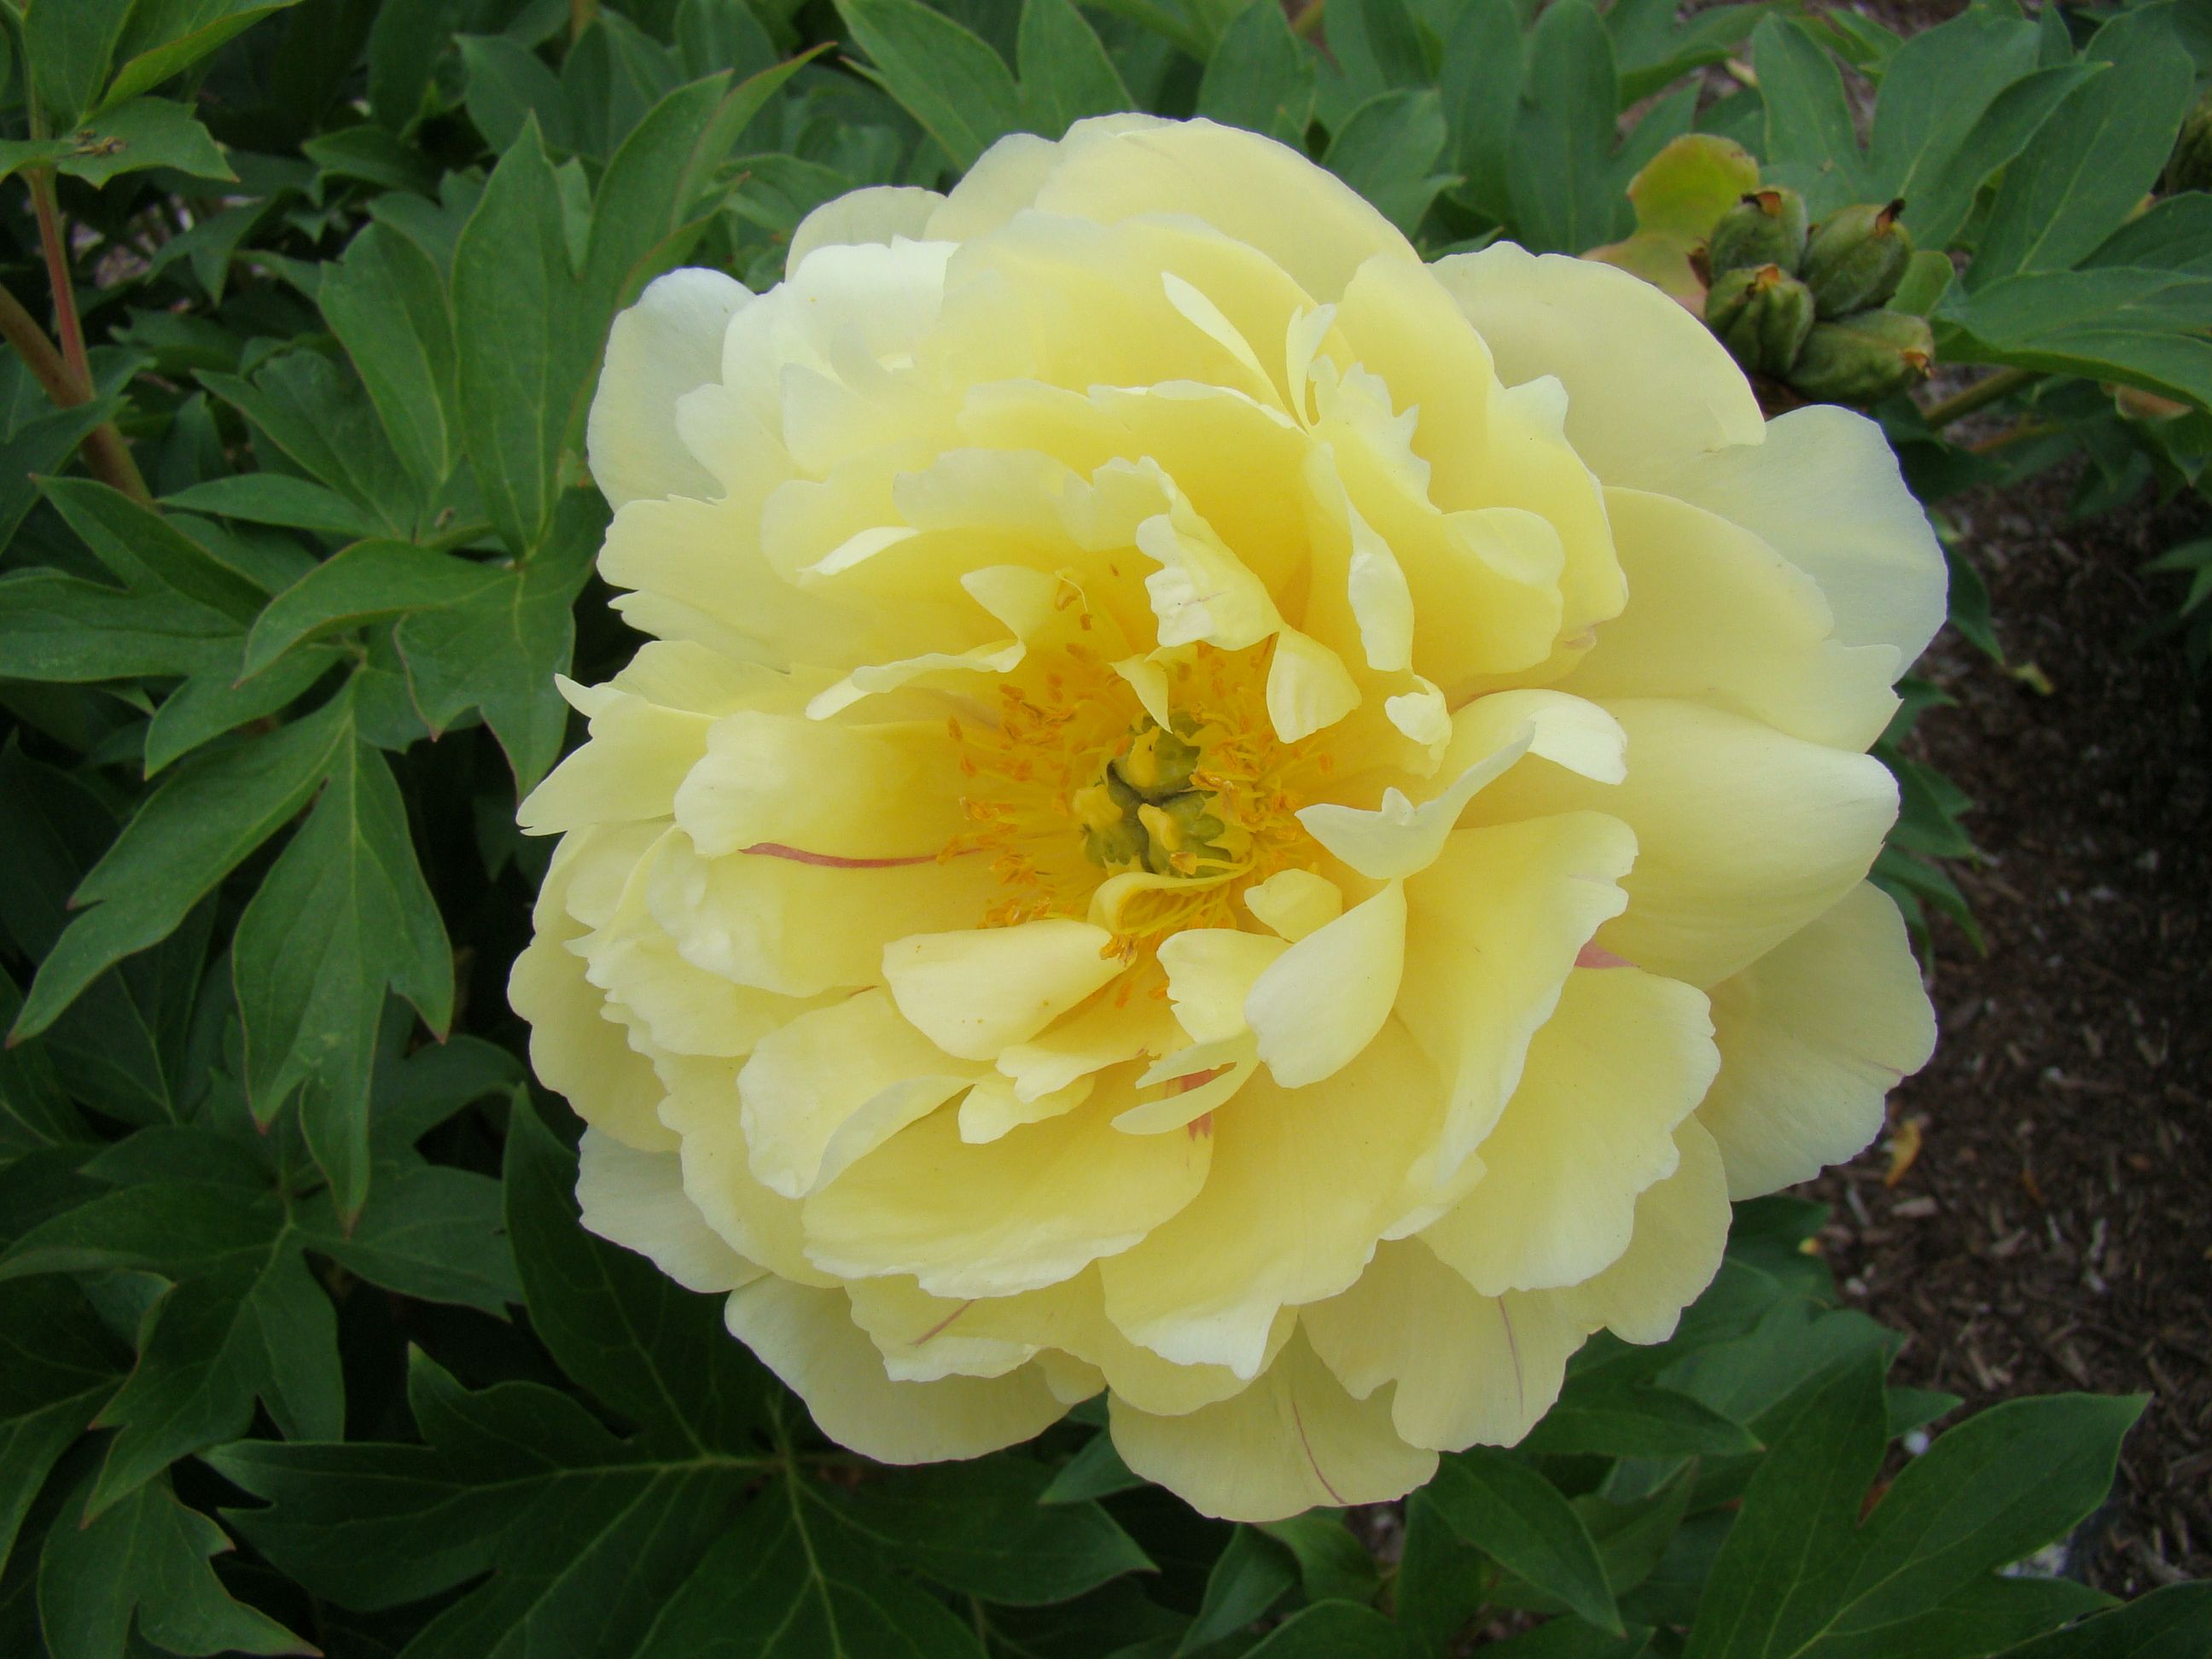 images/plants/paeonia/pae-golden-ticket/pae-golden-ticket-0001.JPG